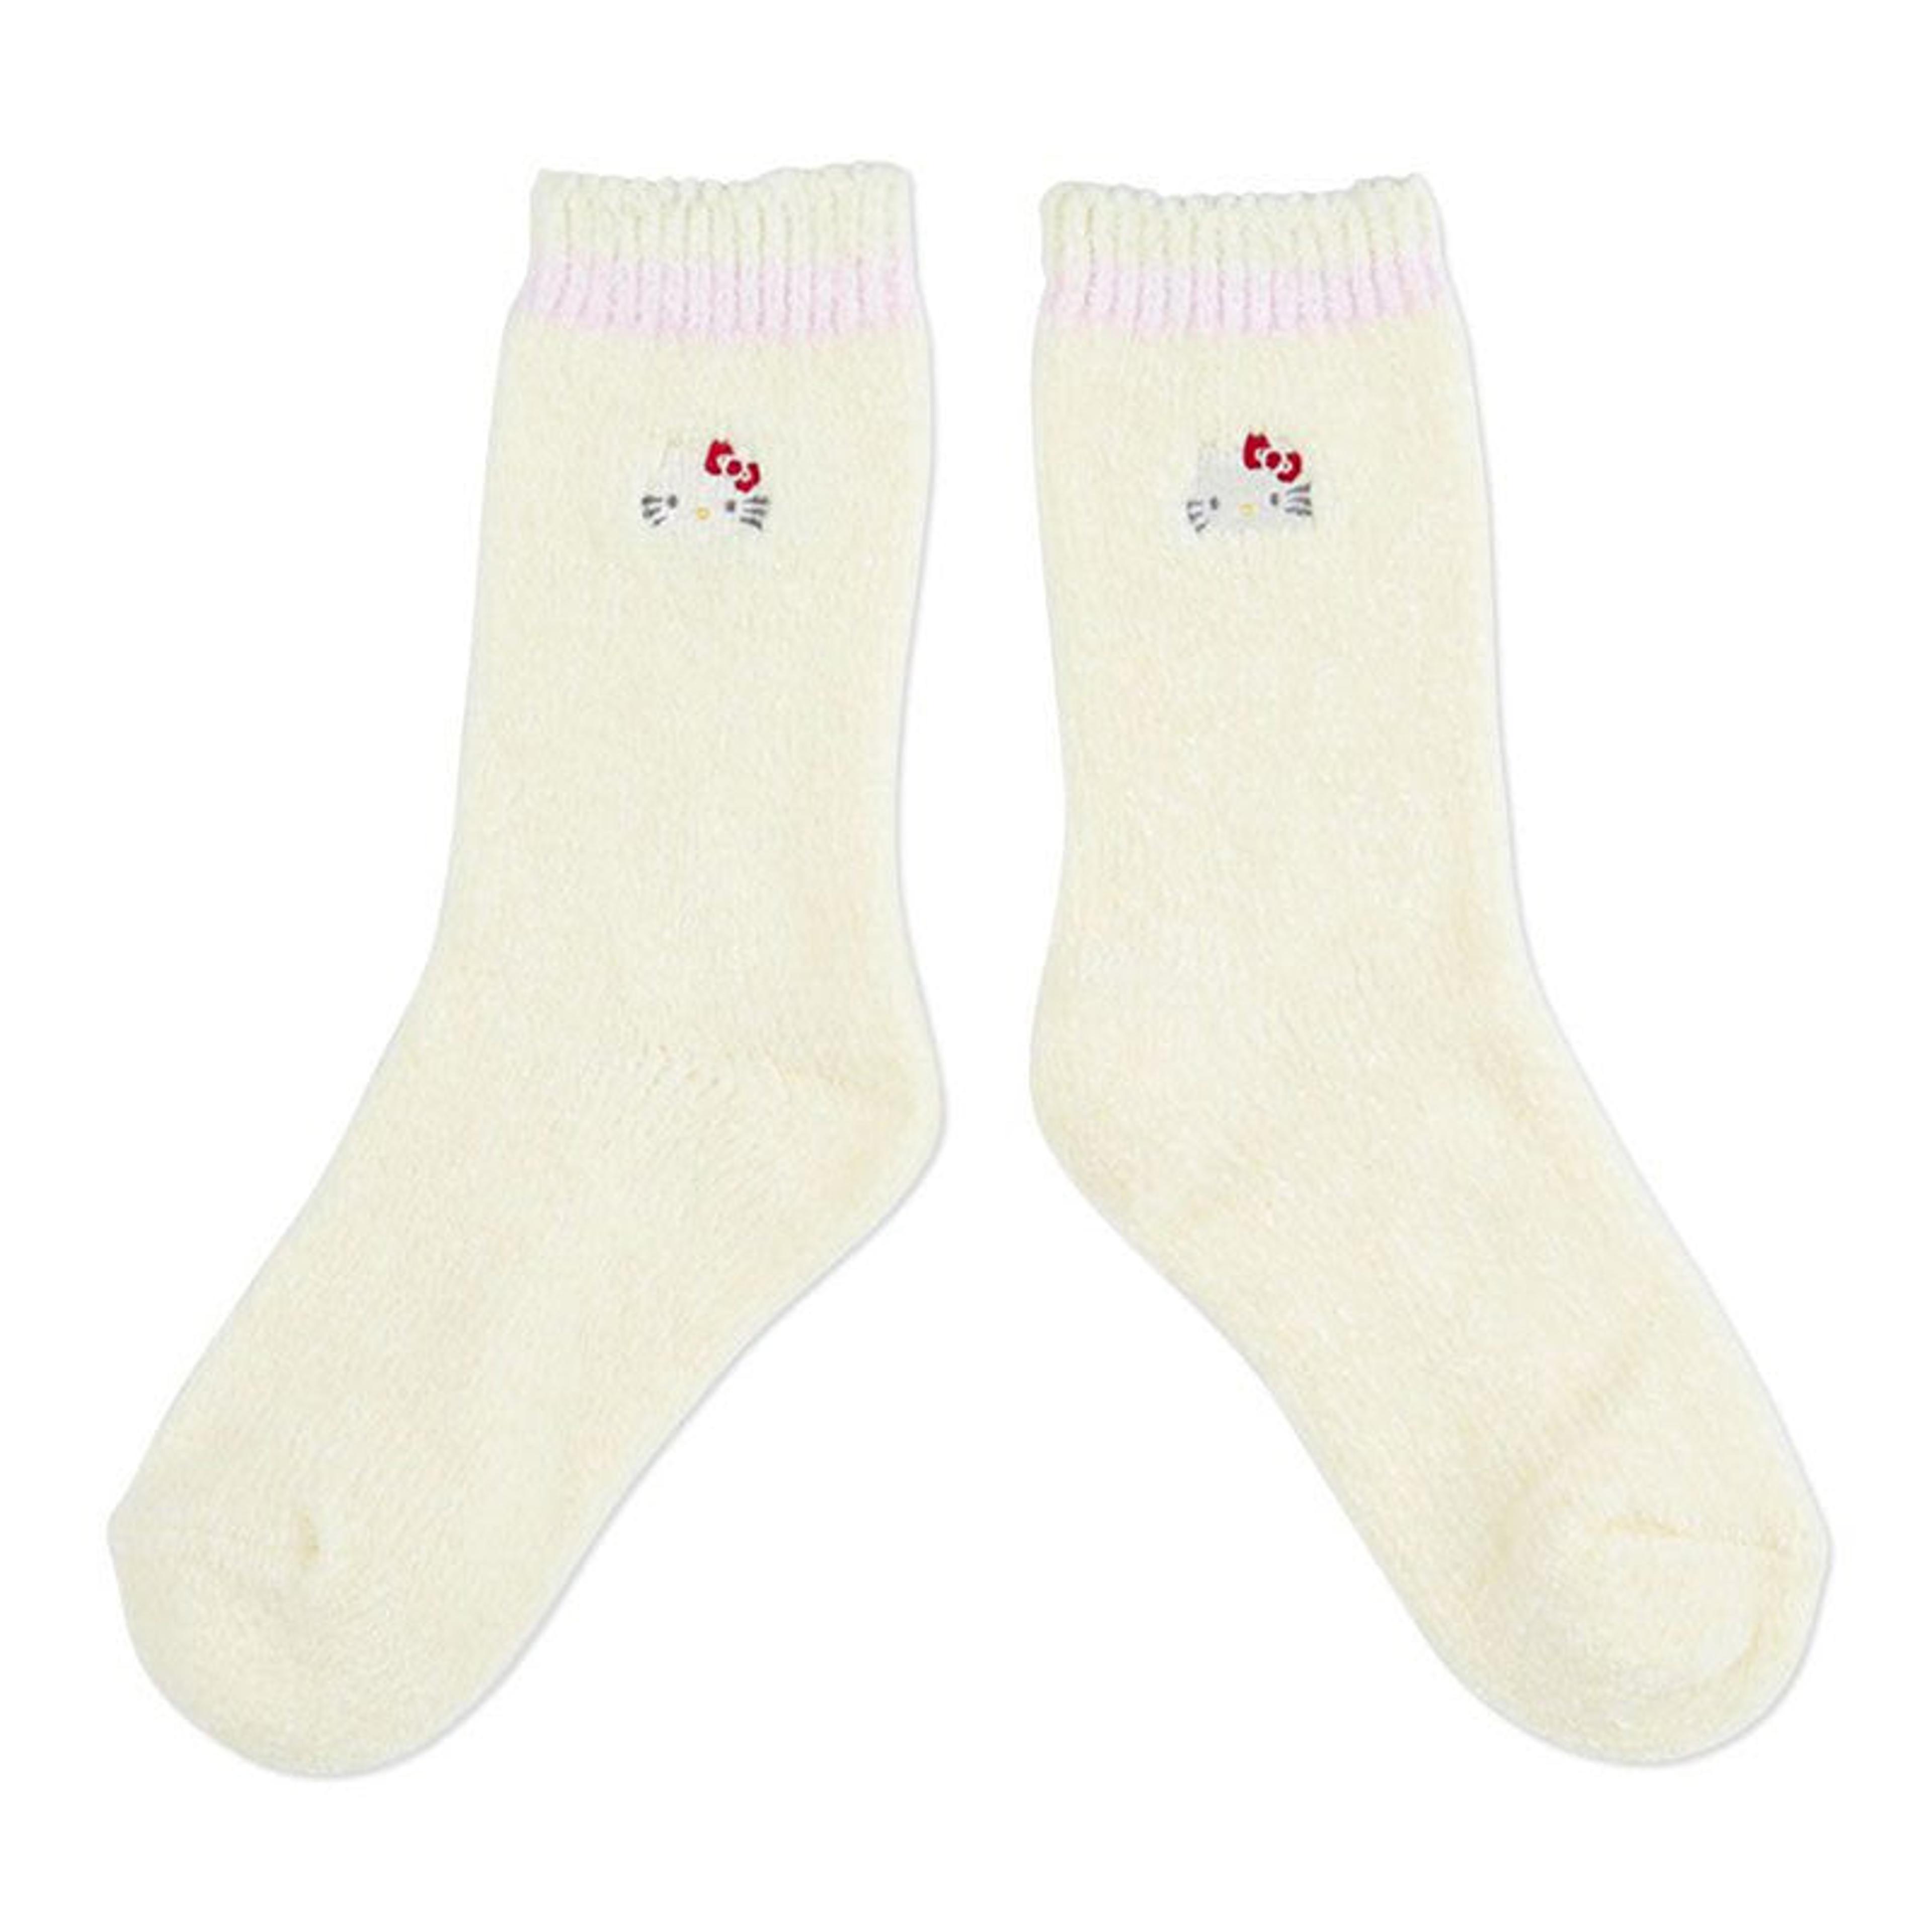 Alternate View 1 of Sanrio Characters Crew Embroidered Face Socks